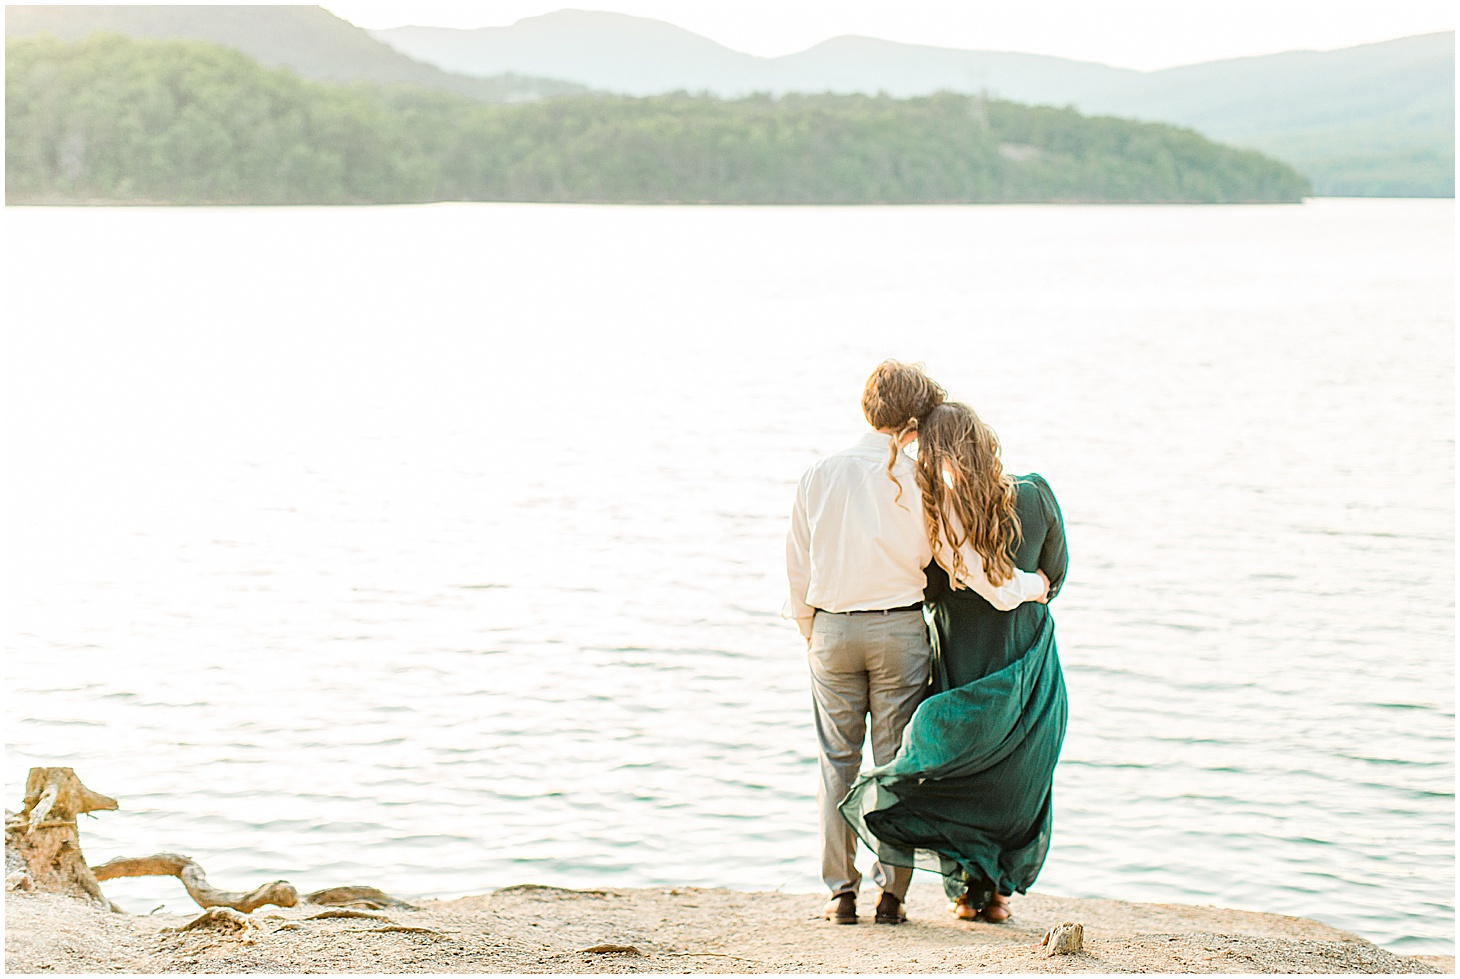 carvinscoveengagementsession_roanokeengagementsession_carvinscove_virginiawedding_virginiaweddingphotographer_vaweddingphotographer_photo_0042.jpg